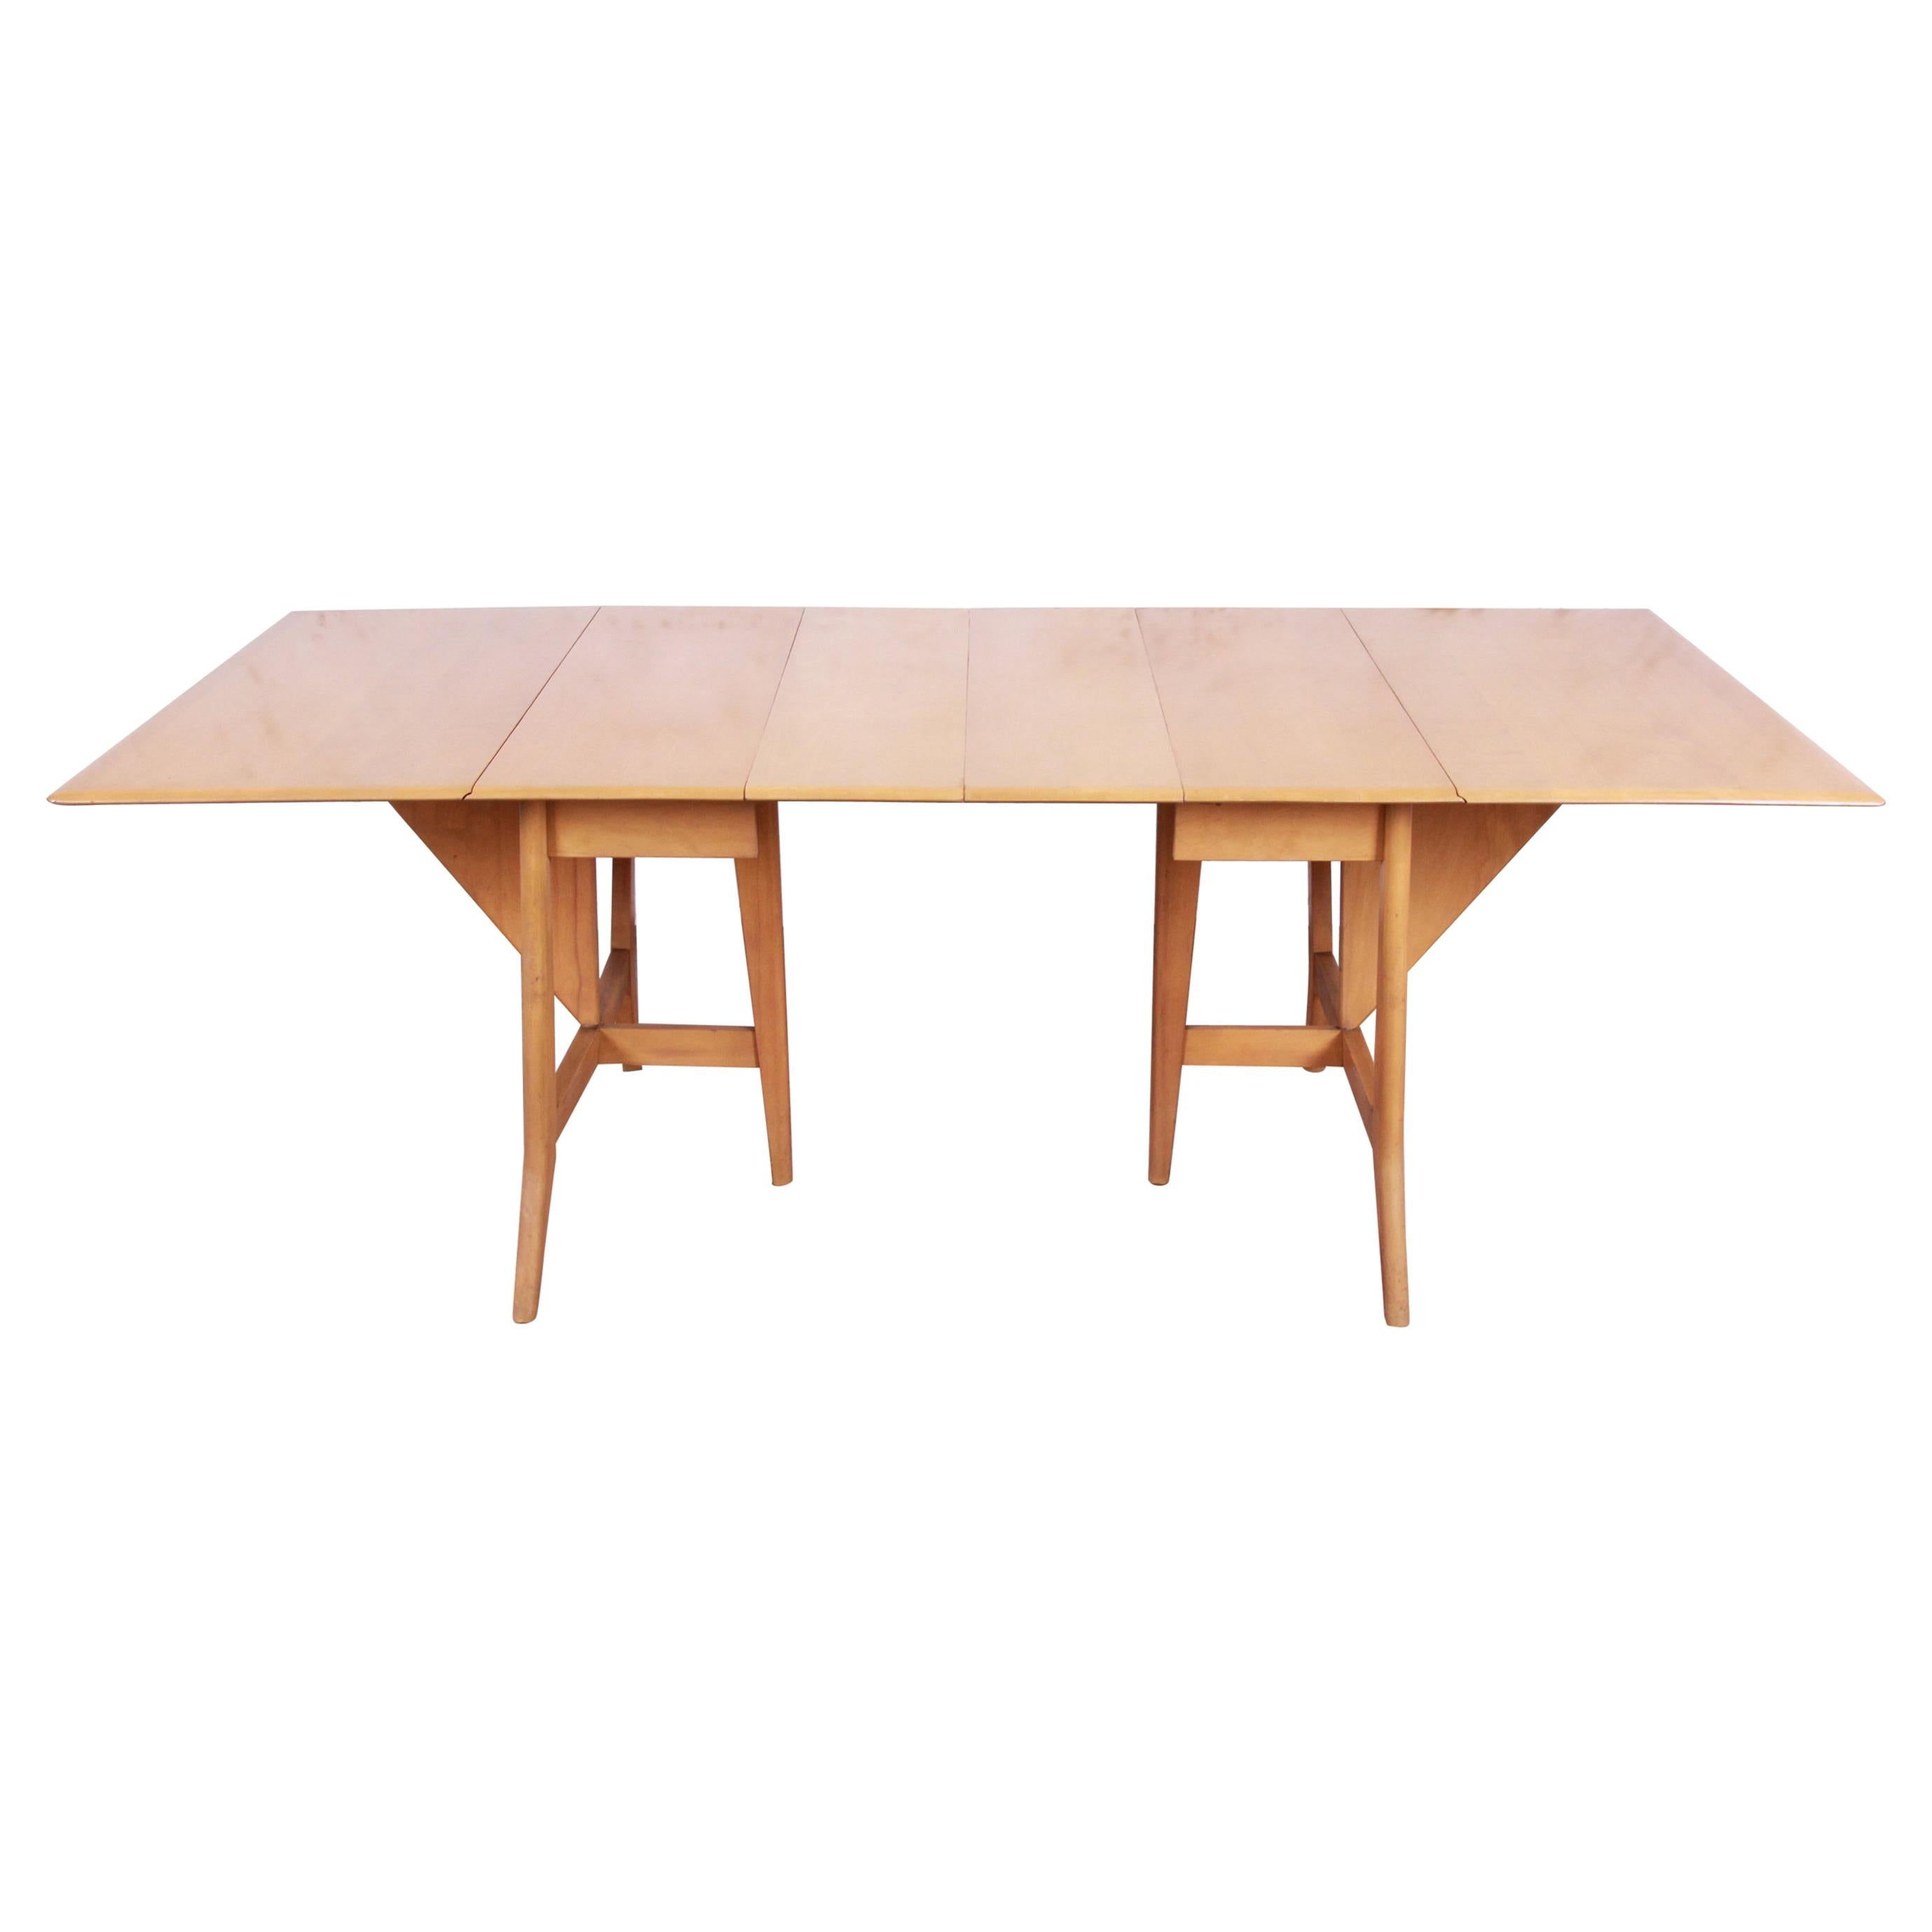 Heywood Wakefield Mid-Century Modern Solid Maple Extension Dining Table, 1950s